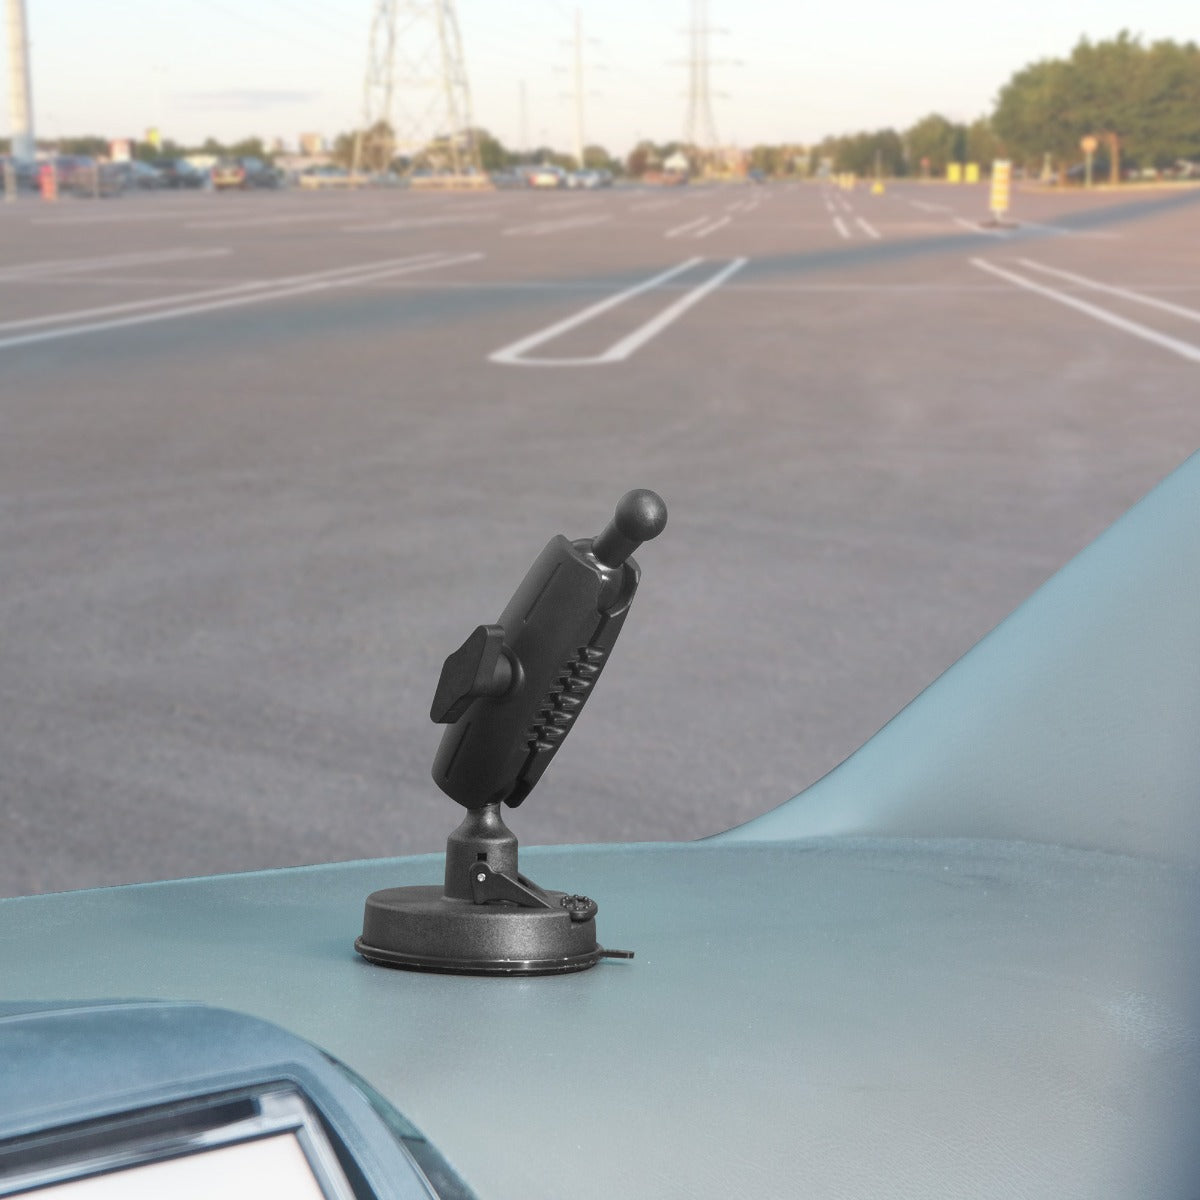 iBOLT 17mm Dual Ball to “Sticky” Suction Cup Mount Base compatible w/ Garmin GPS and iBOLT Phone Holders